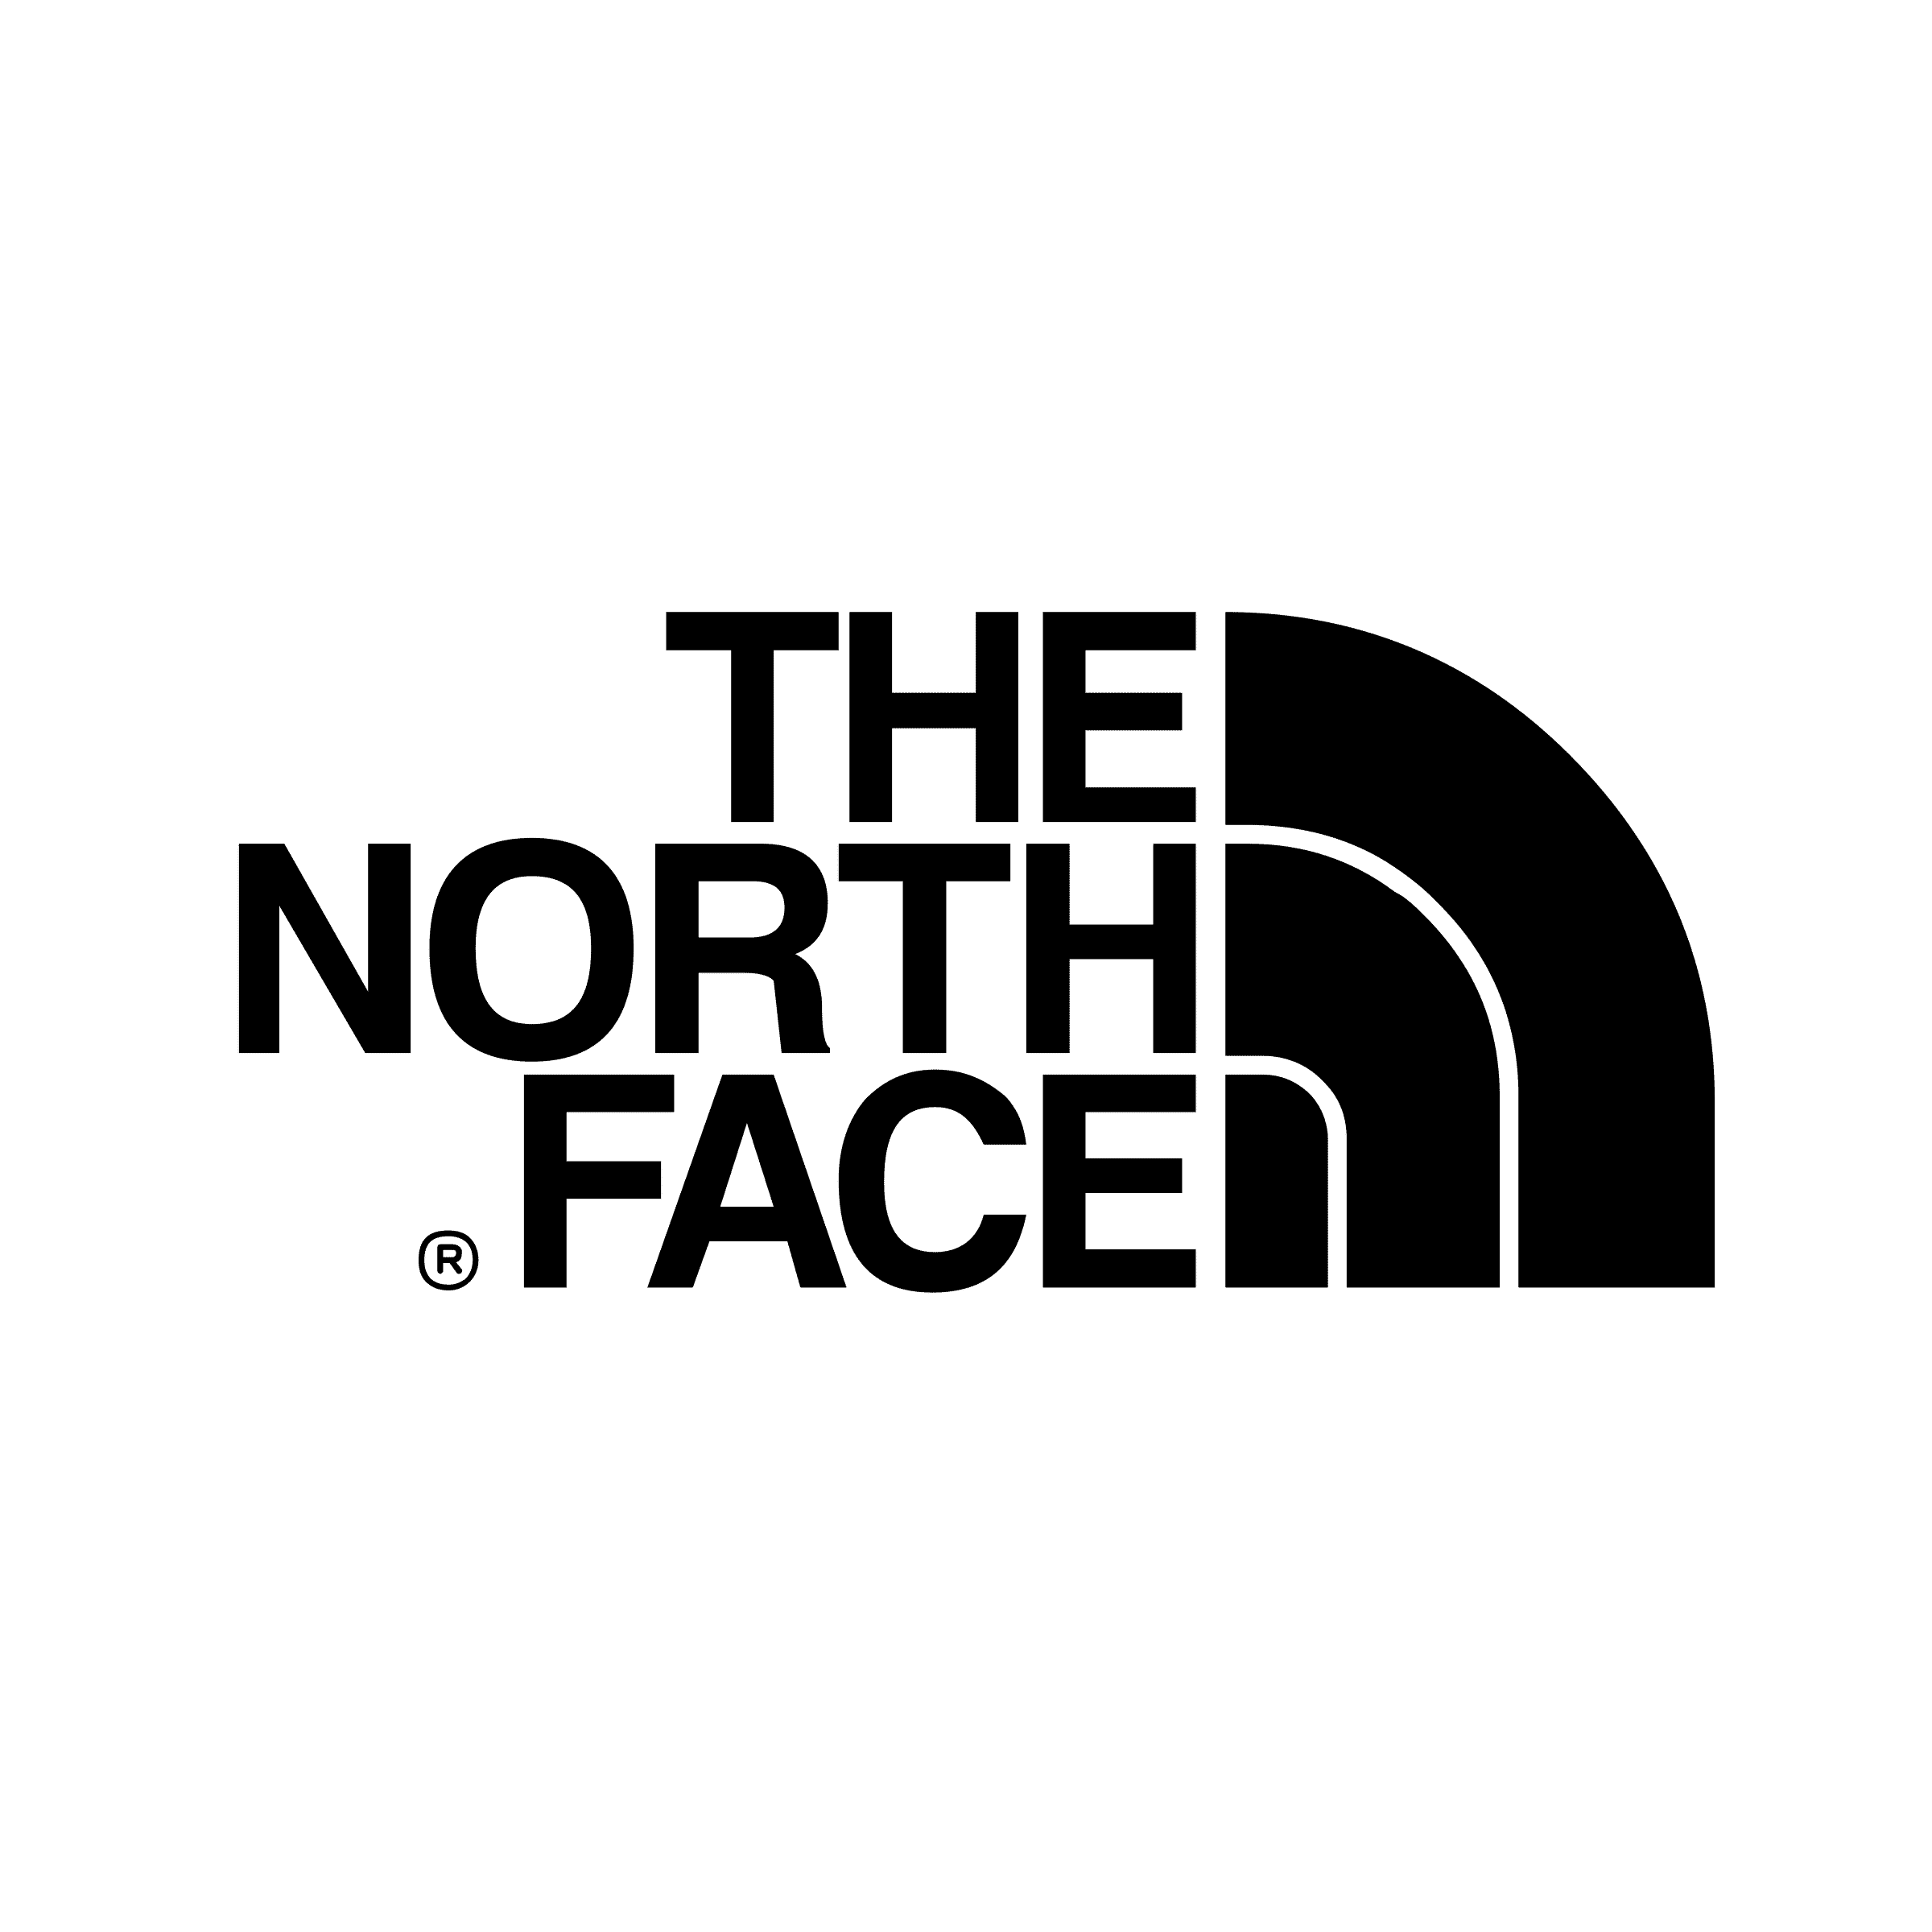 THE NORTH FACE - 10% Off Your First Online Purchase When You Join Vipeak Rewards